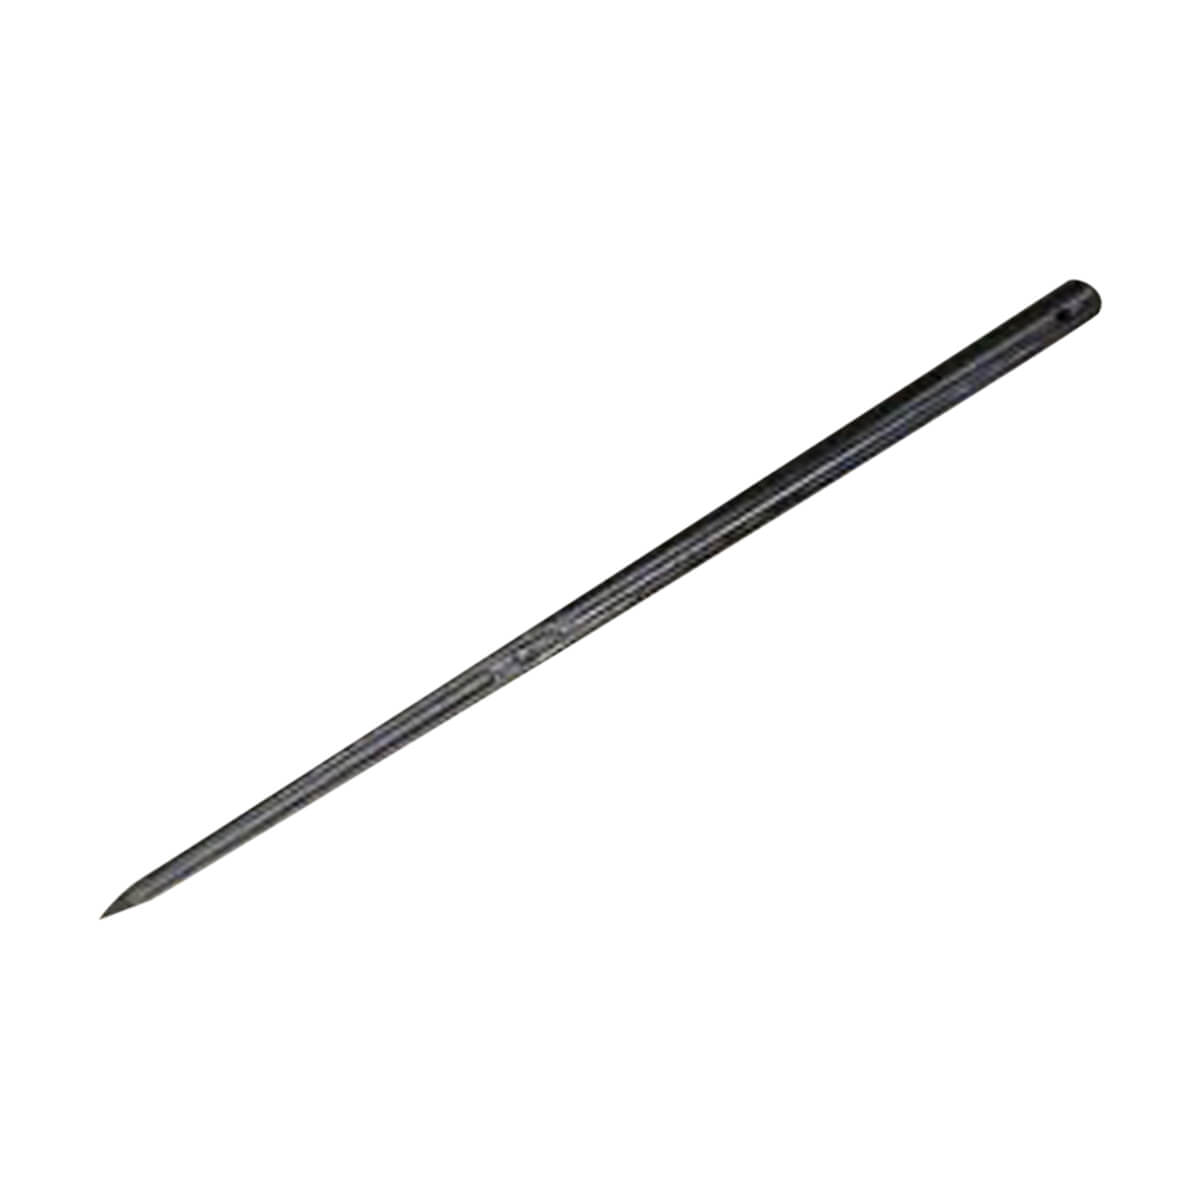 Bolt-On Bale Spear - 47-in